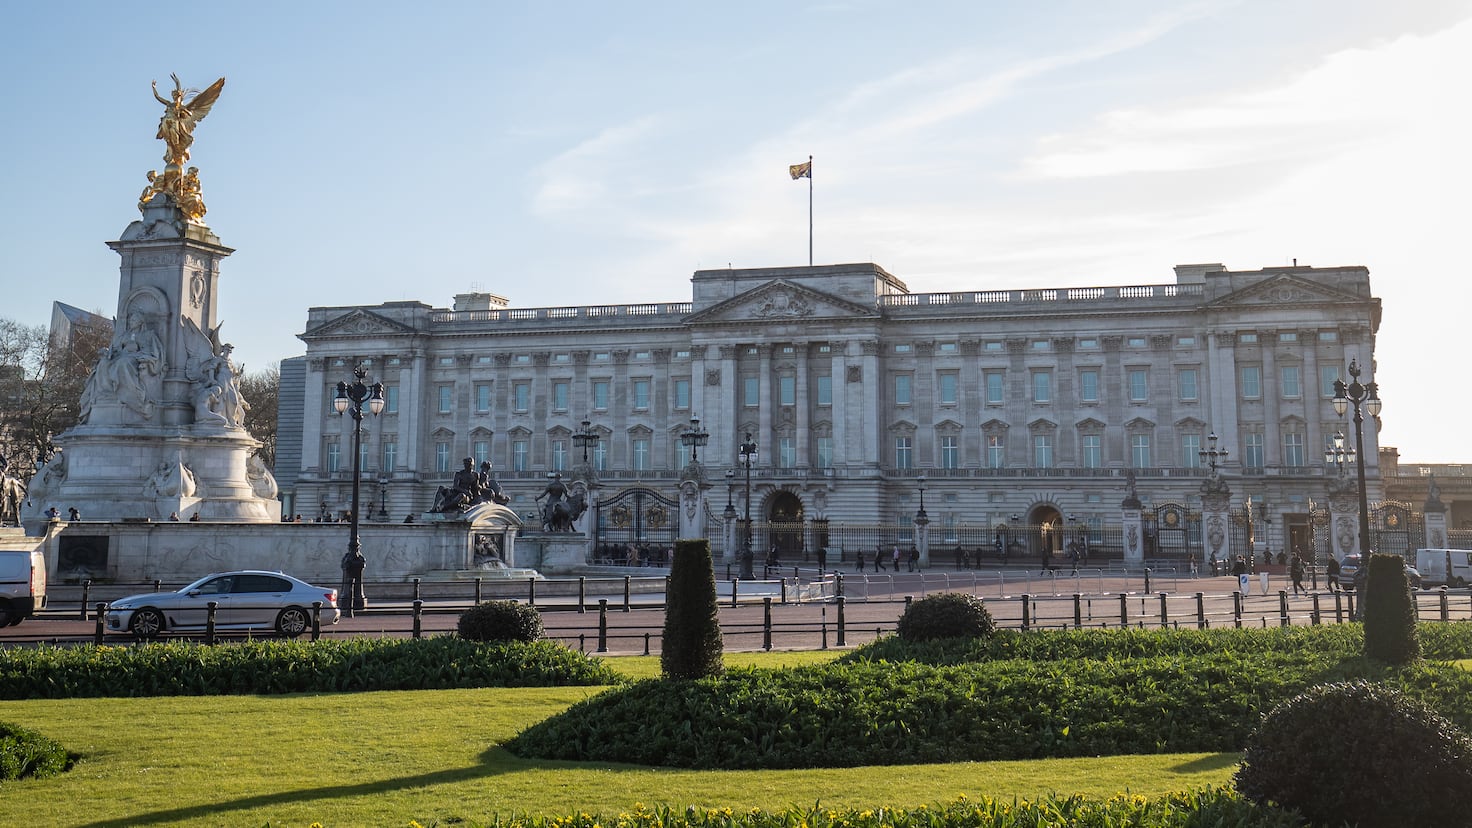 How much would Buckingham Palace be worth if it were put up for sale?